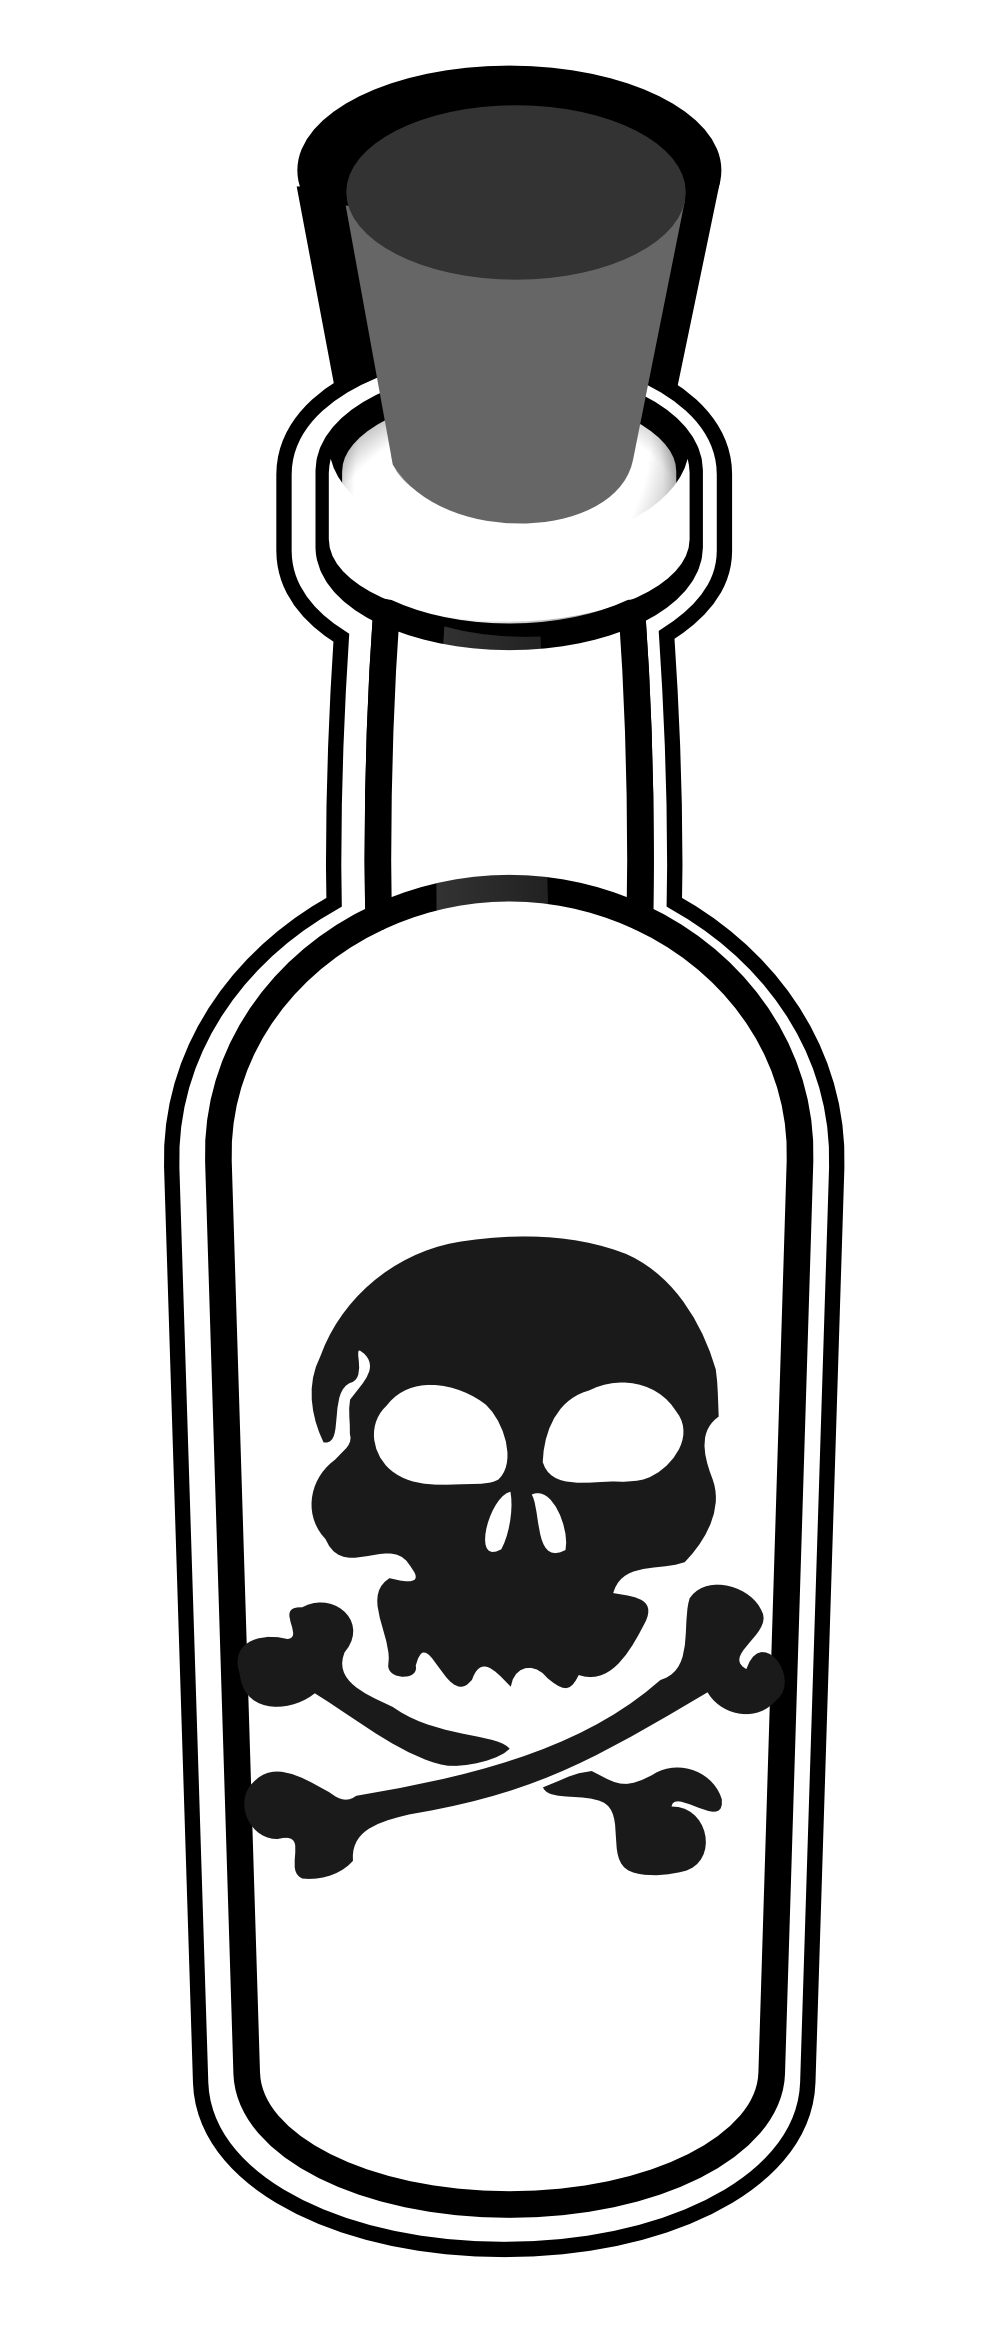 Poison 20clipart - Free Clipart Images